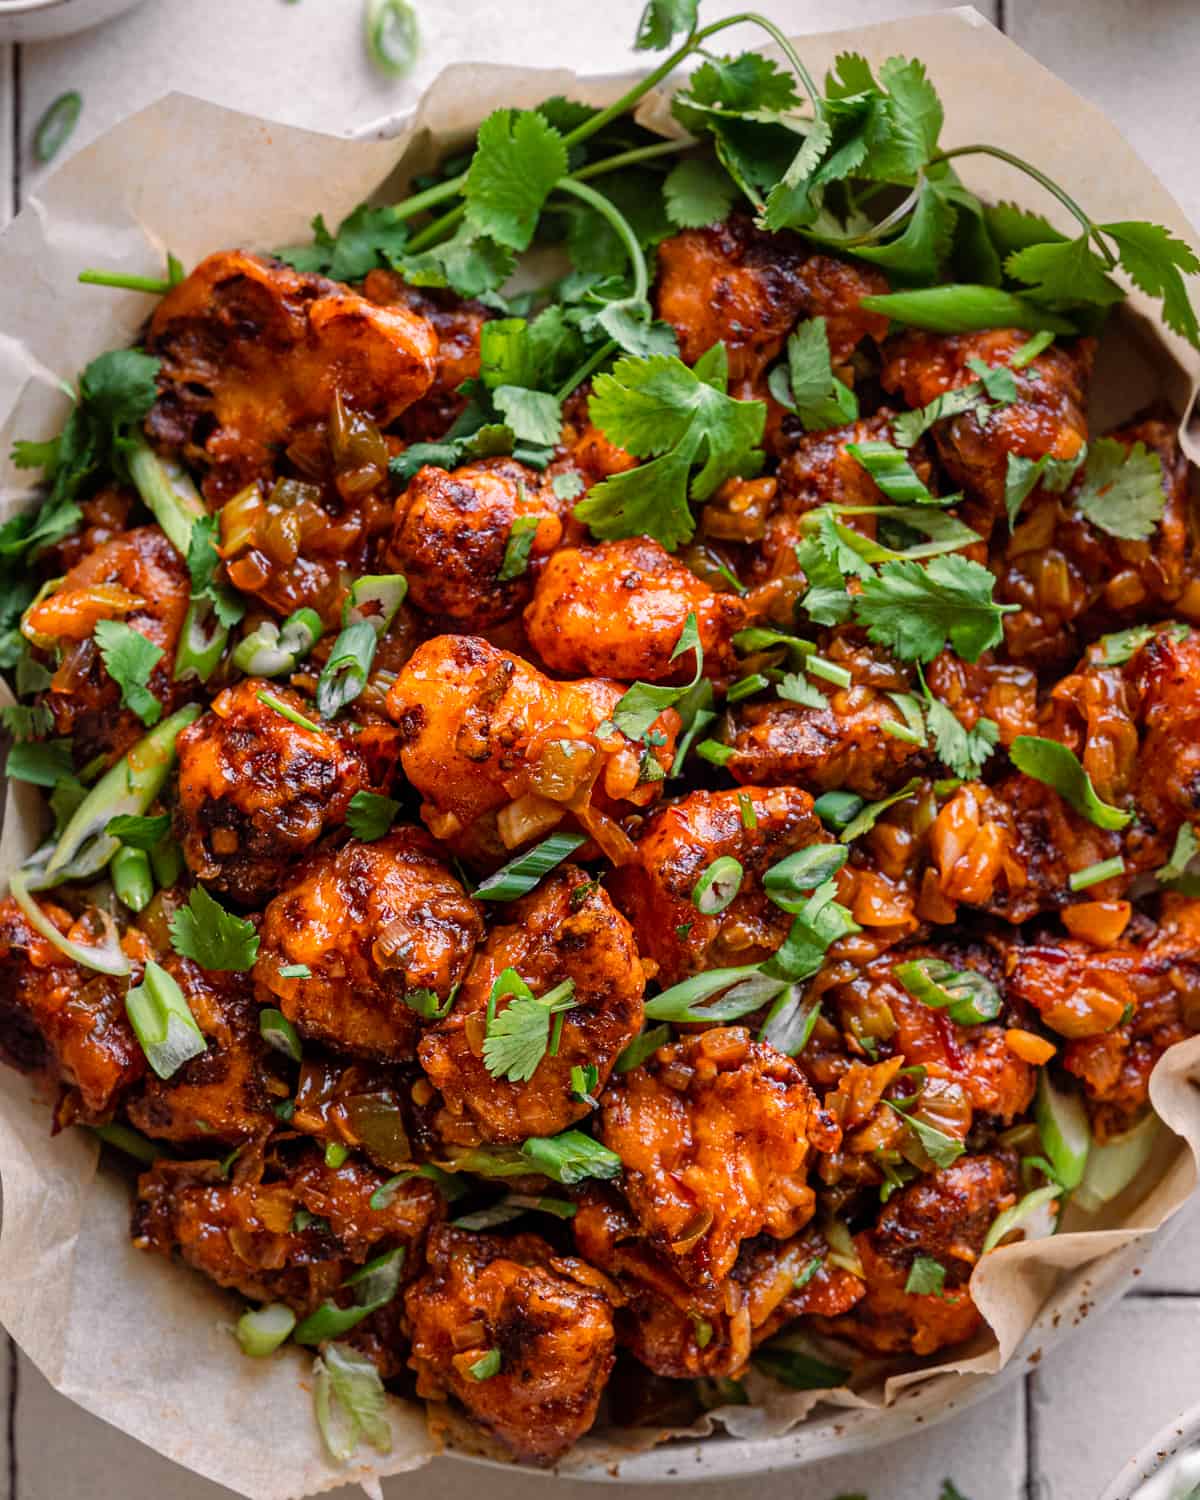 Gobi Manchurian in a parchment paper lined bowl on a white tiled surface, garnished with cilantro and scallions